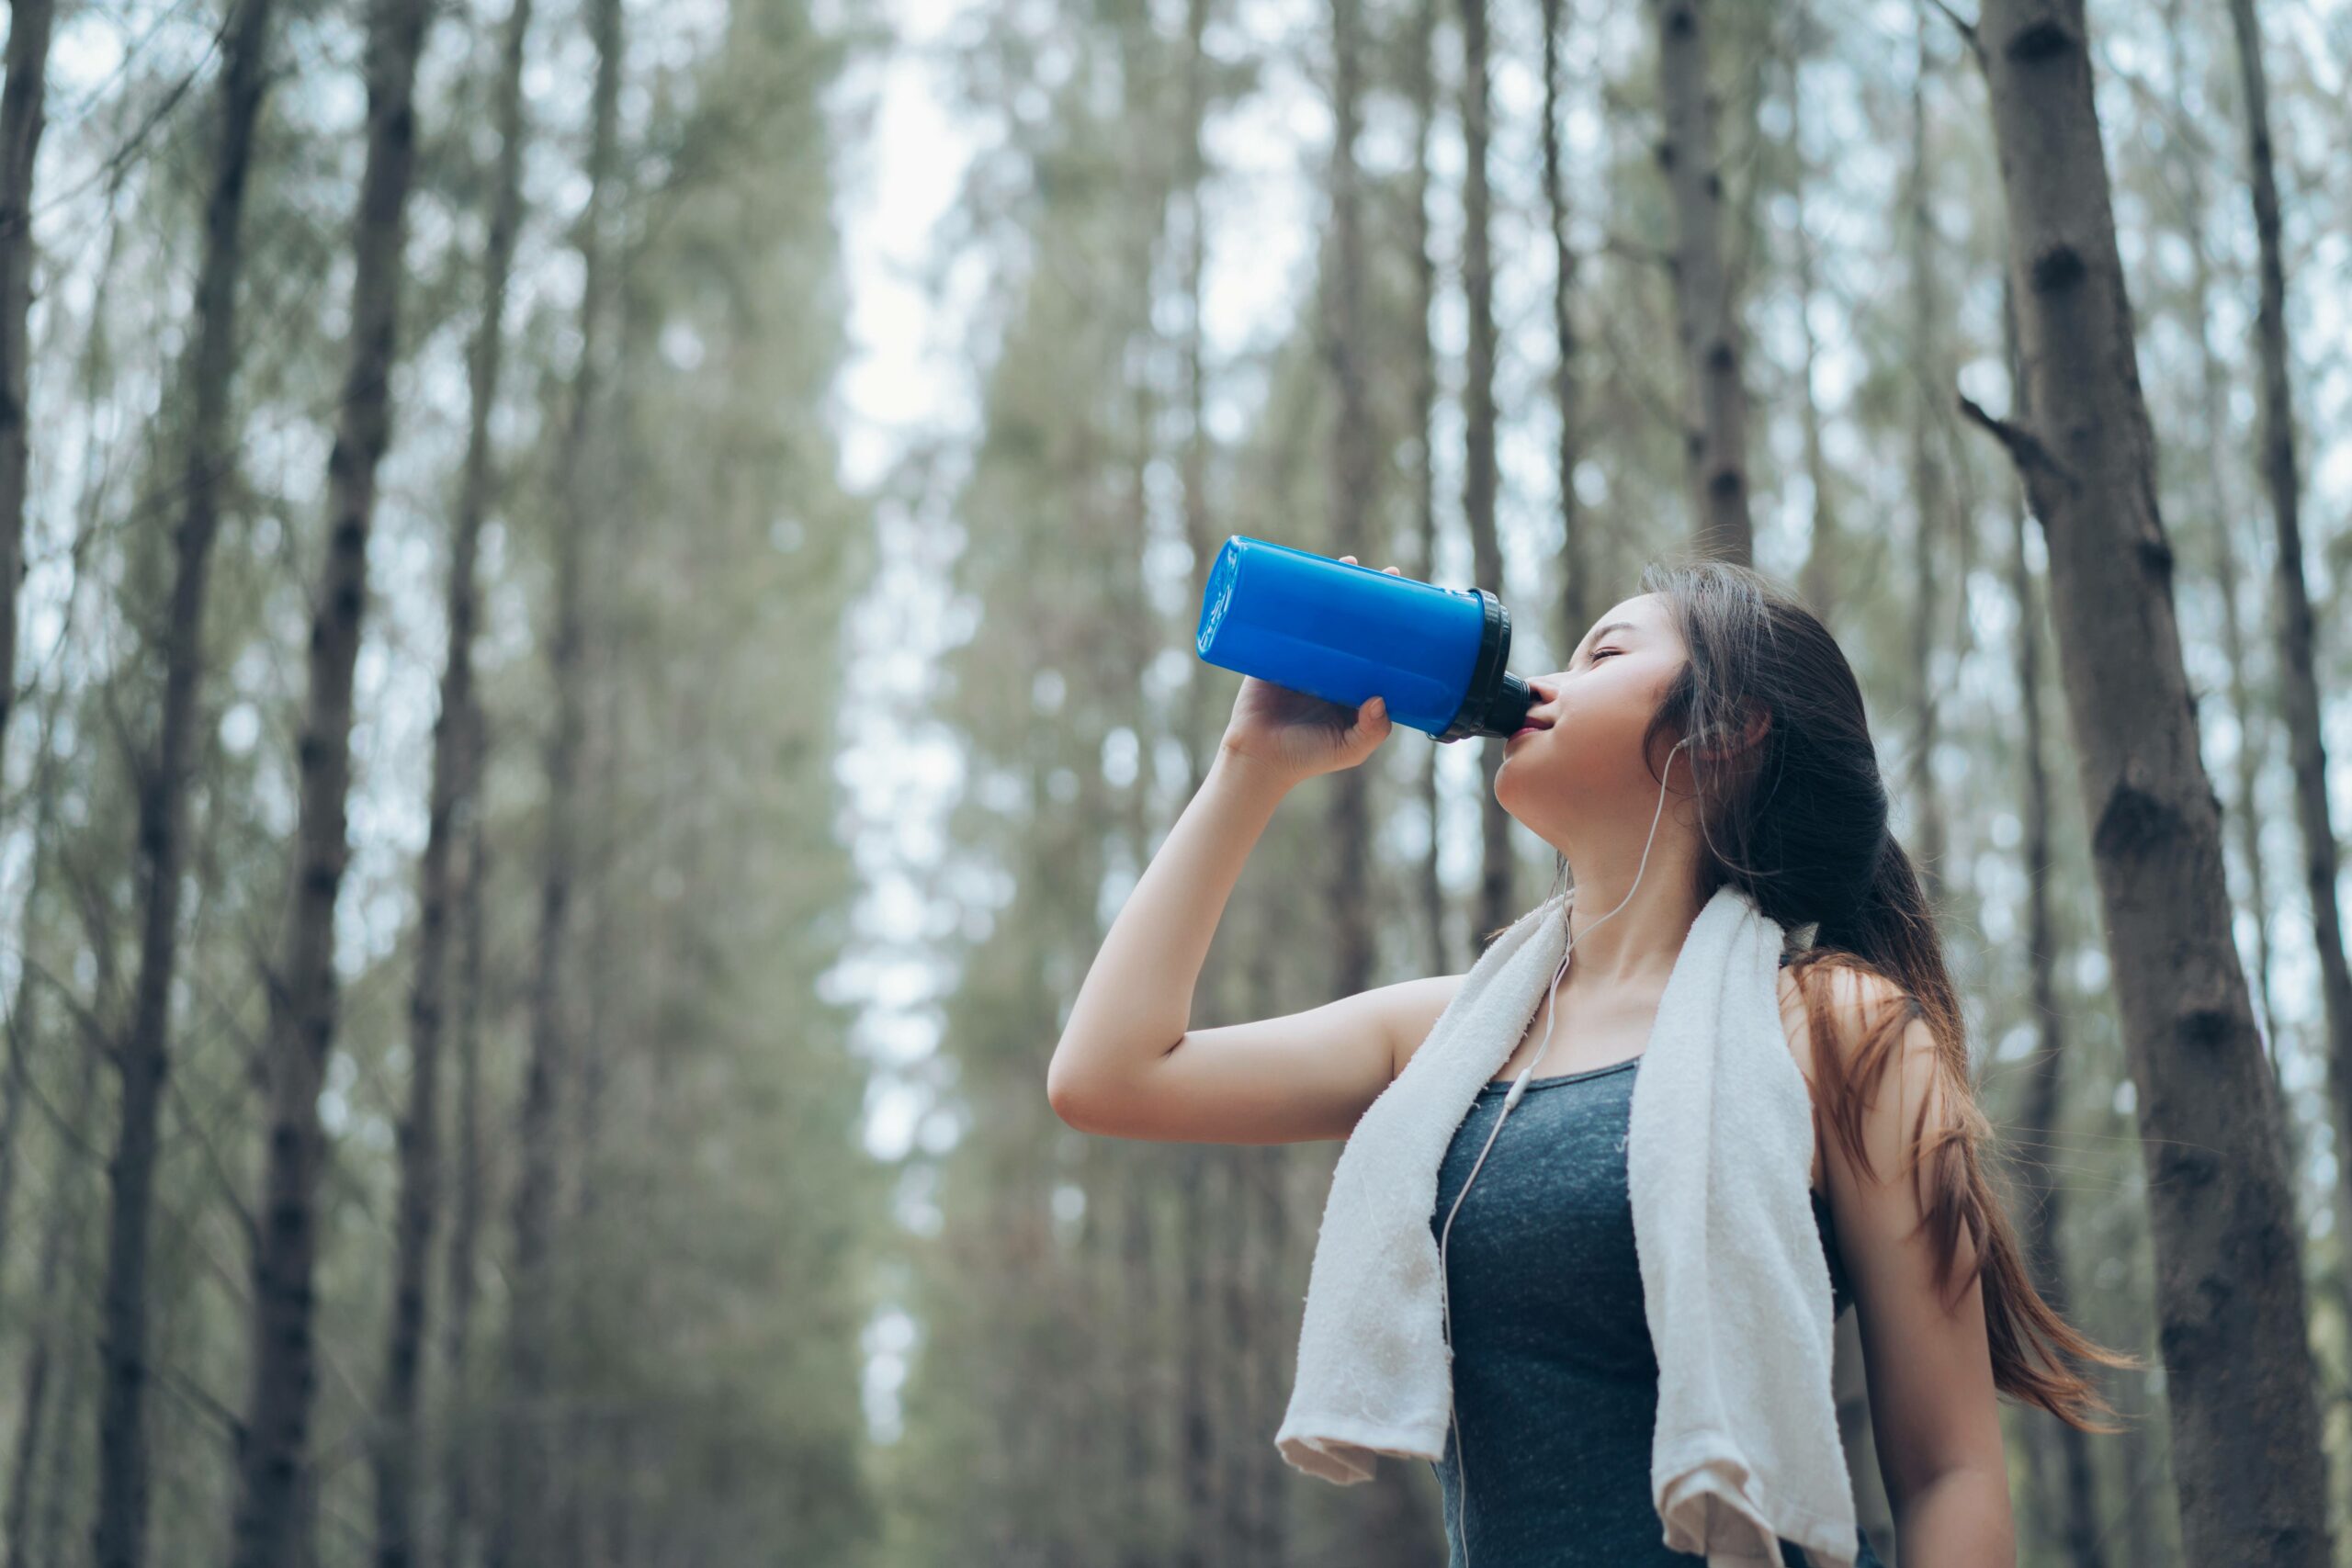 Is Protein Powder Good for Hiking?